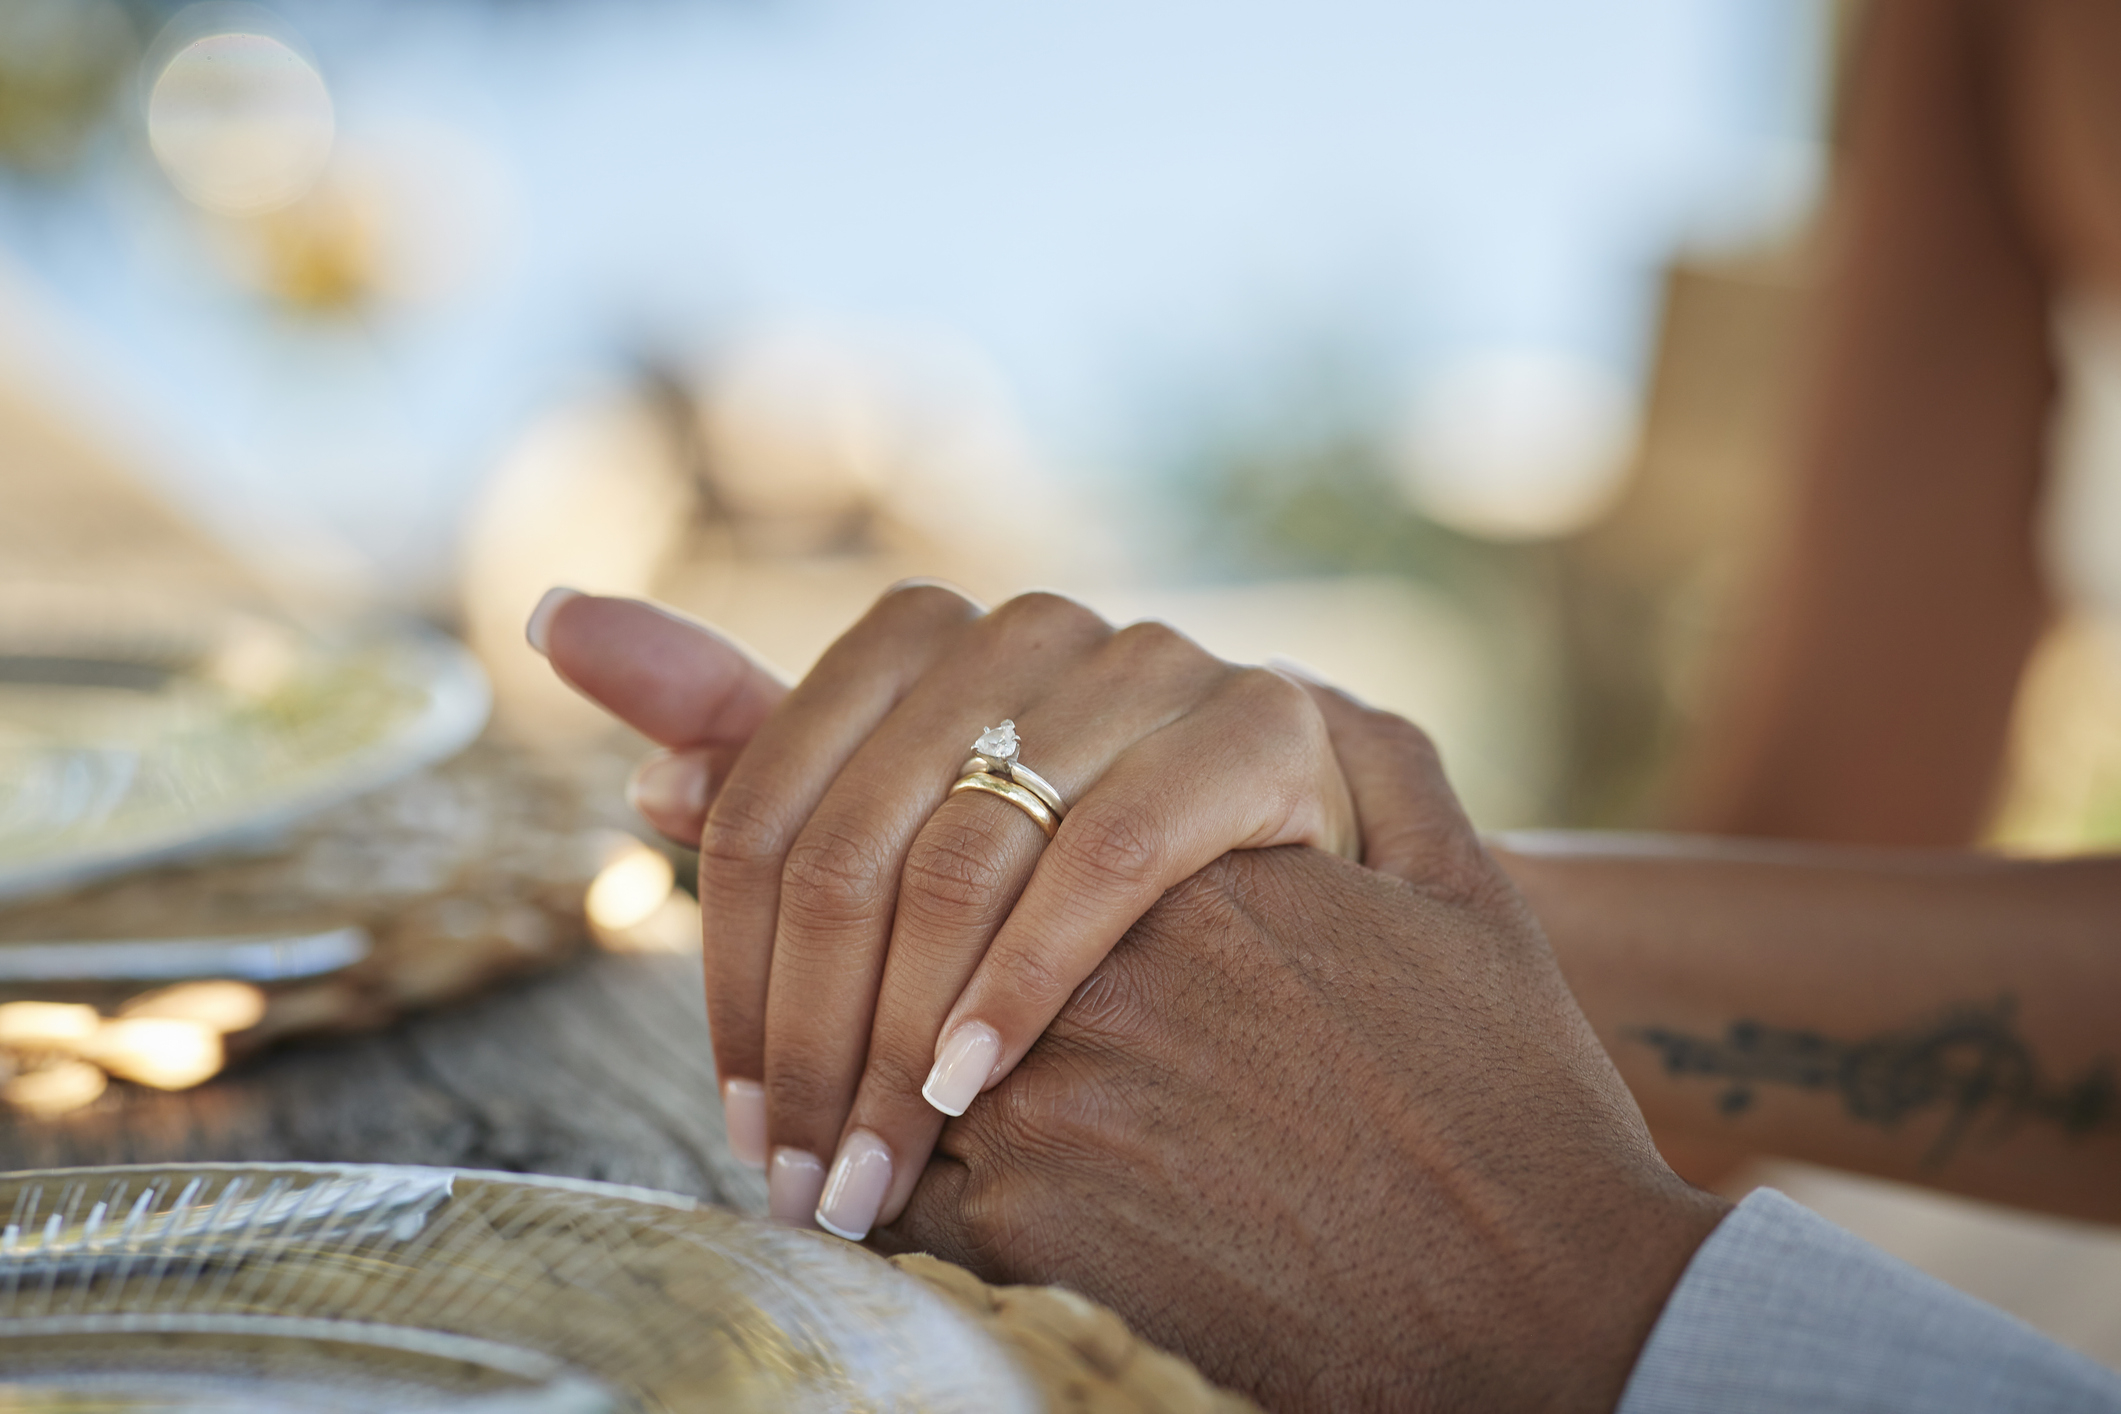 hands holding with a wedding ring showing